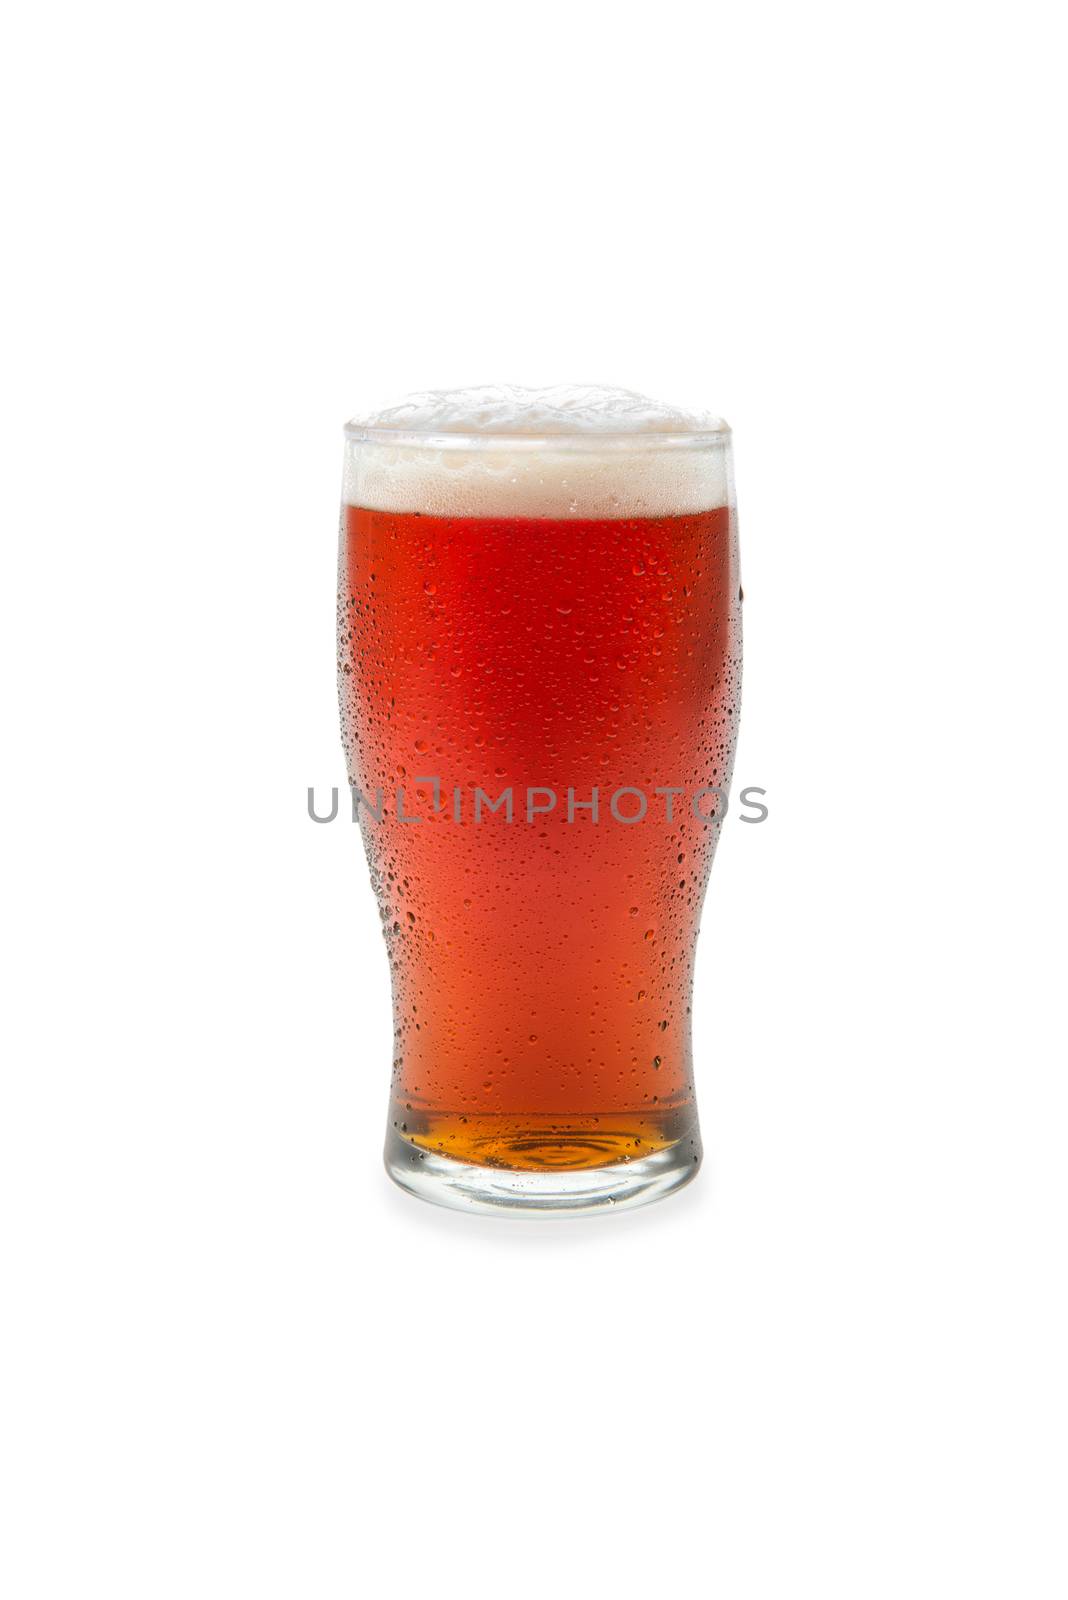 Amber Ale In Pint Glass #1 by patrickstock